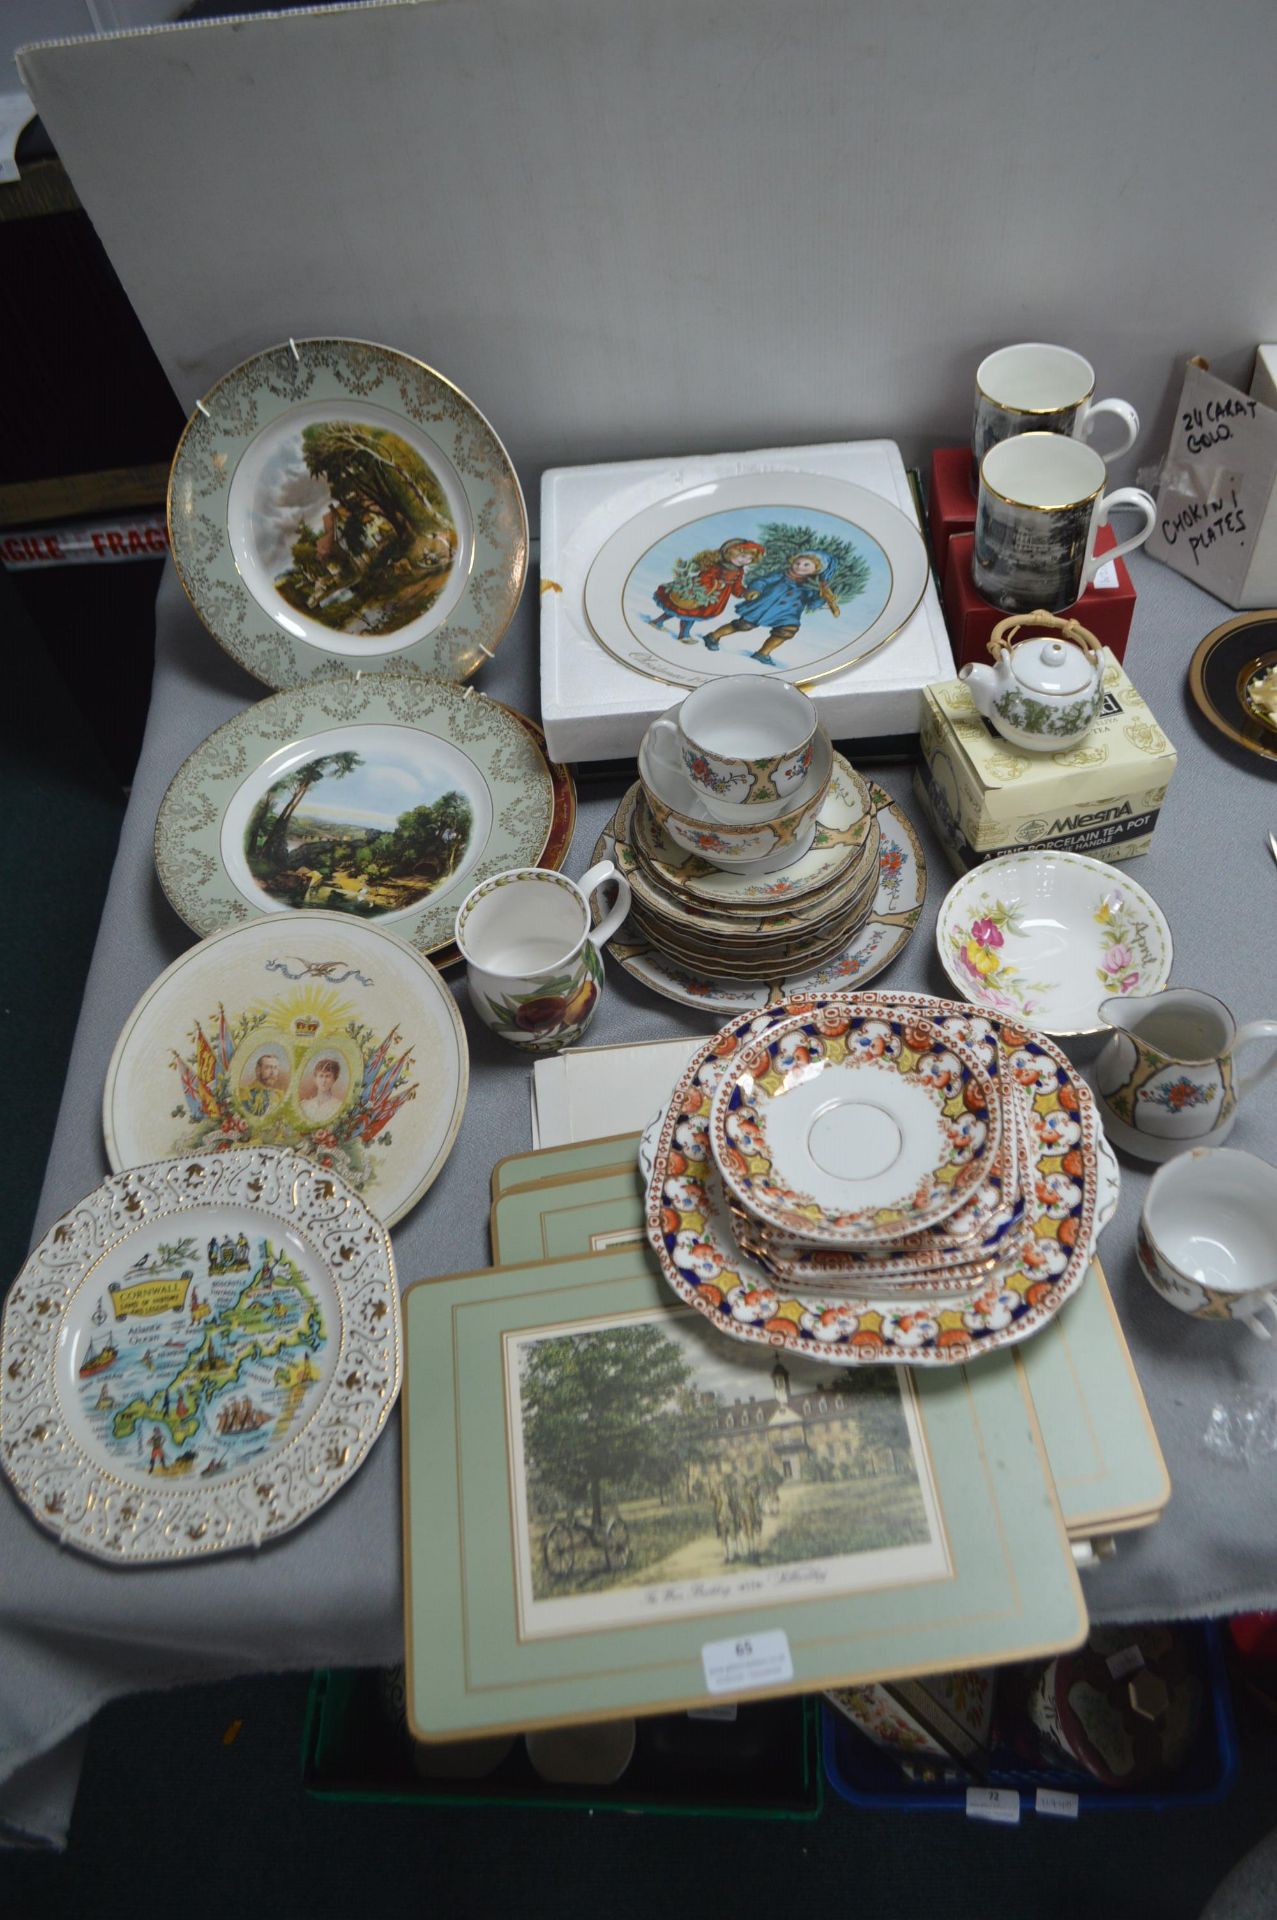 Assorted Pottery and Decorative Plates, etc.